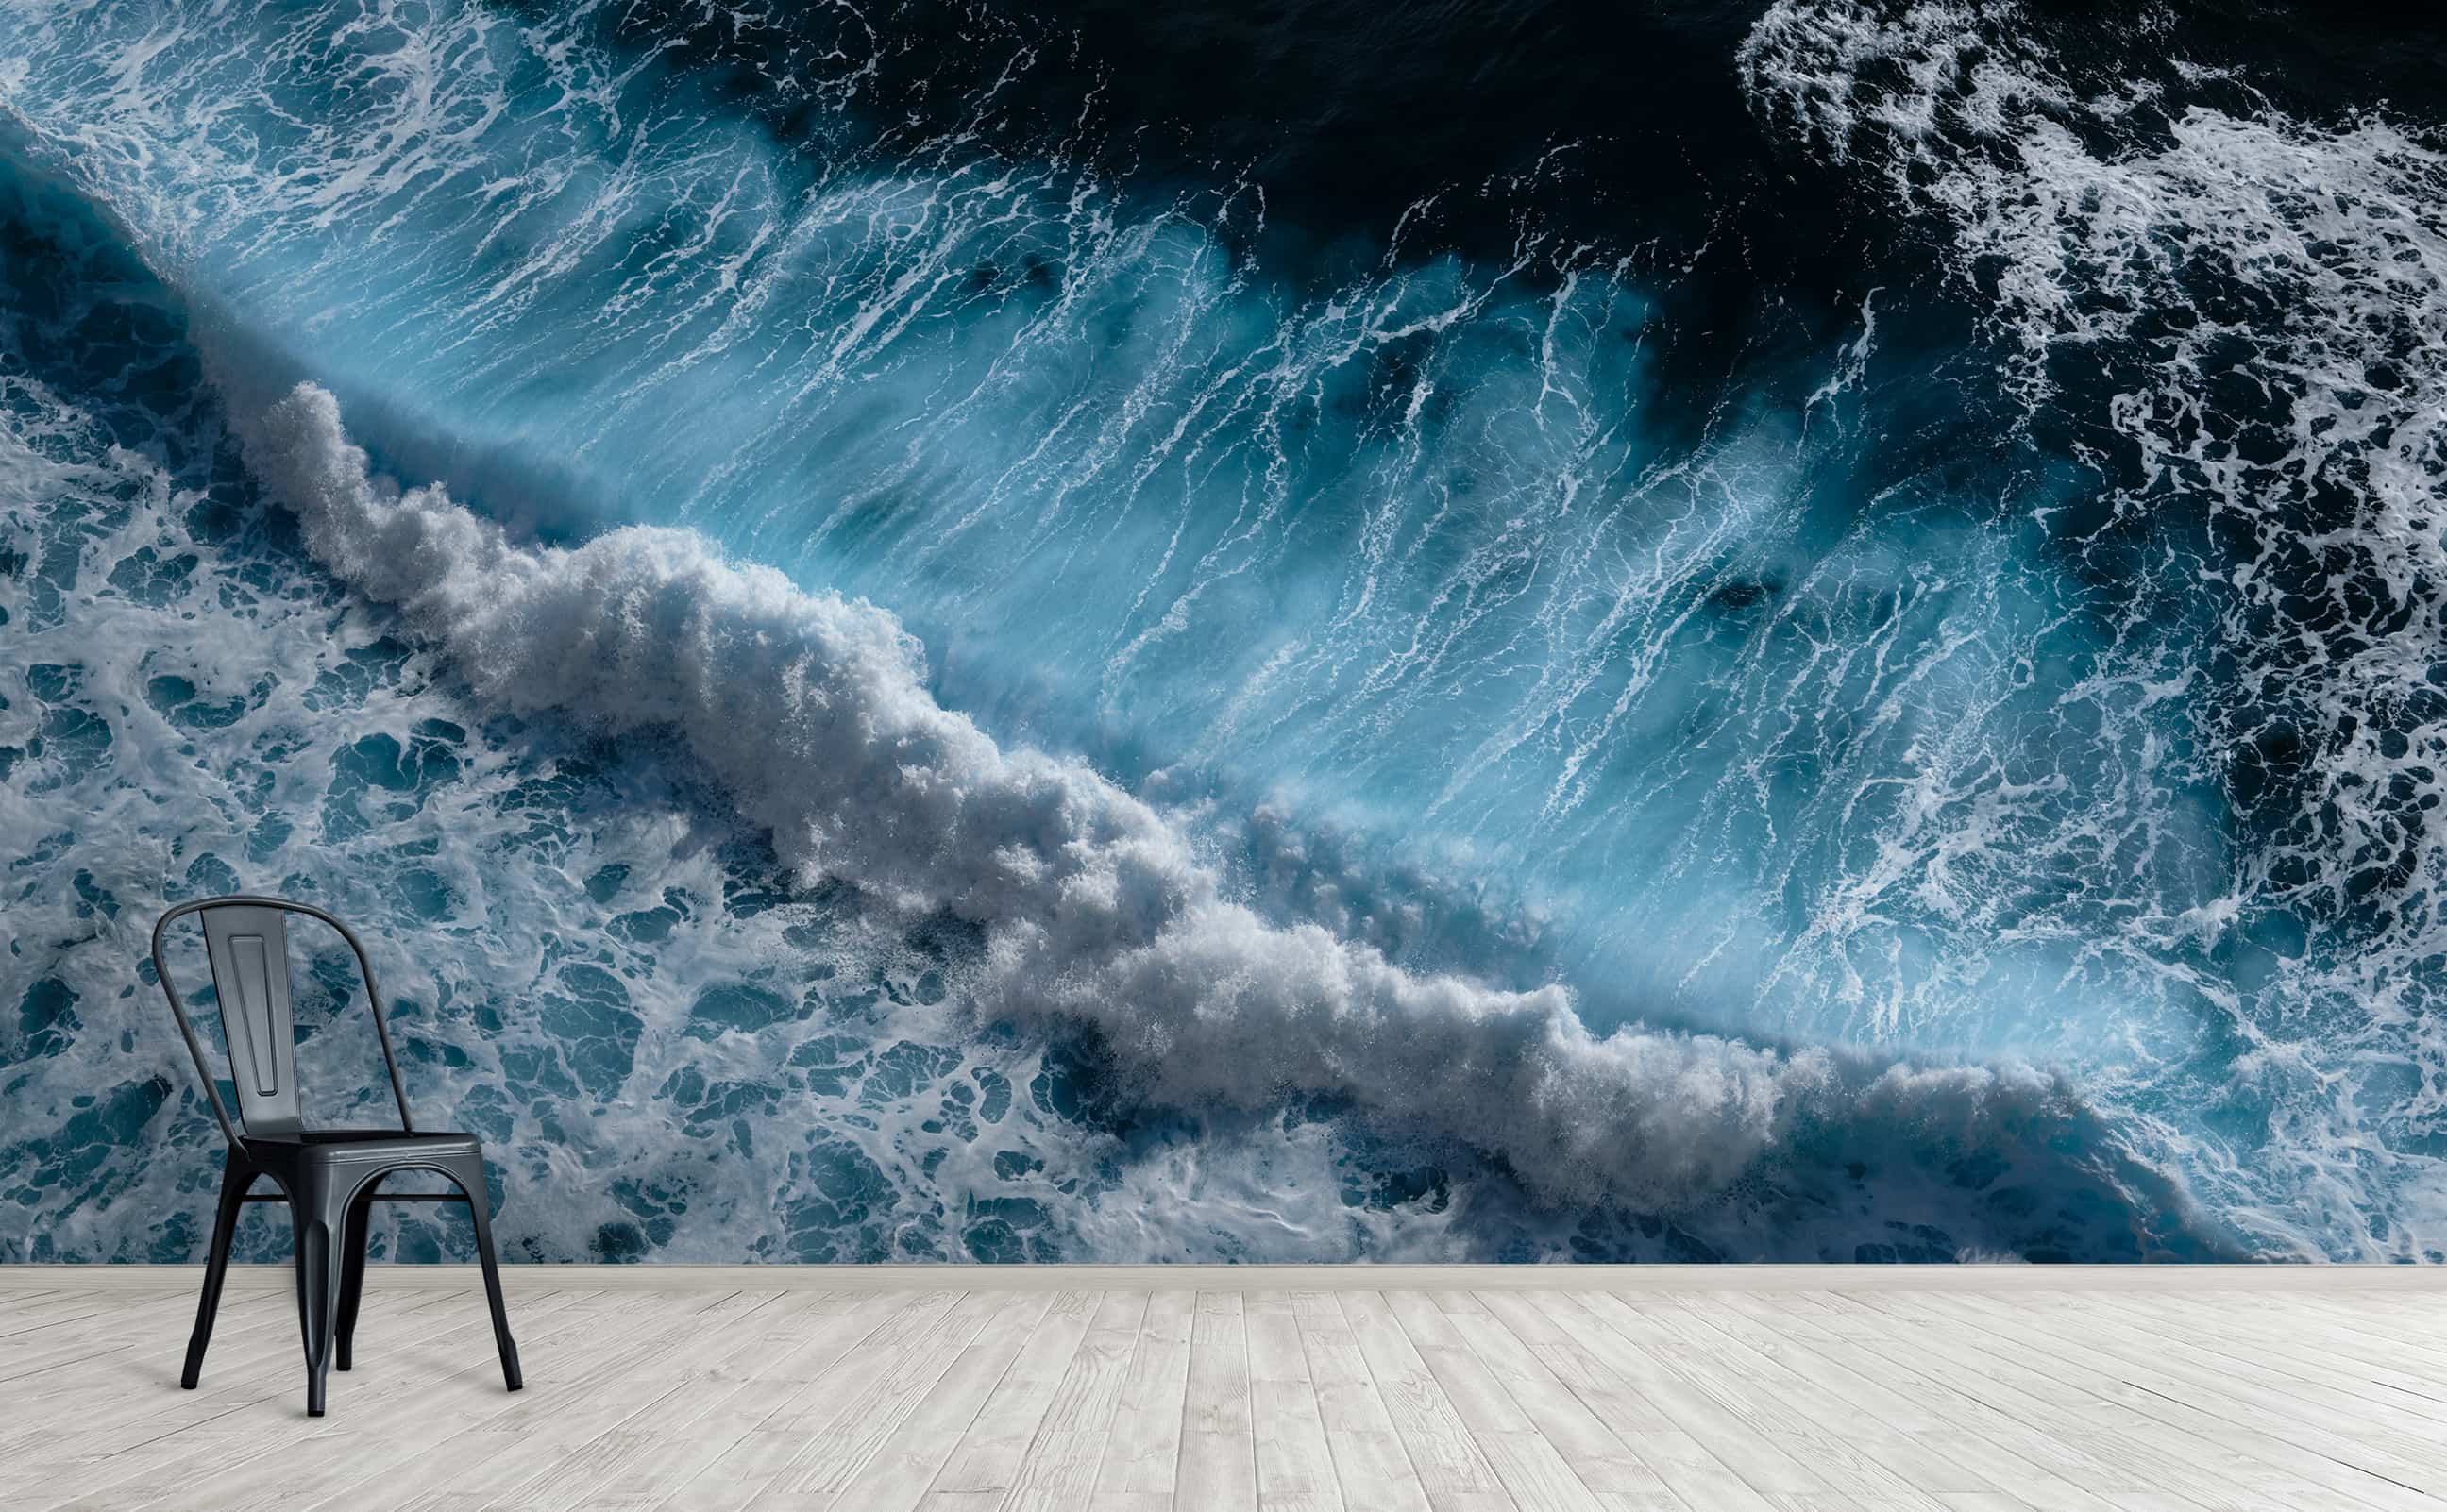 Endless Surf Wall Mural by Walls Need Love┬«